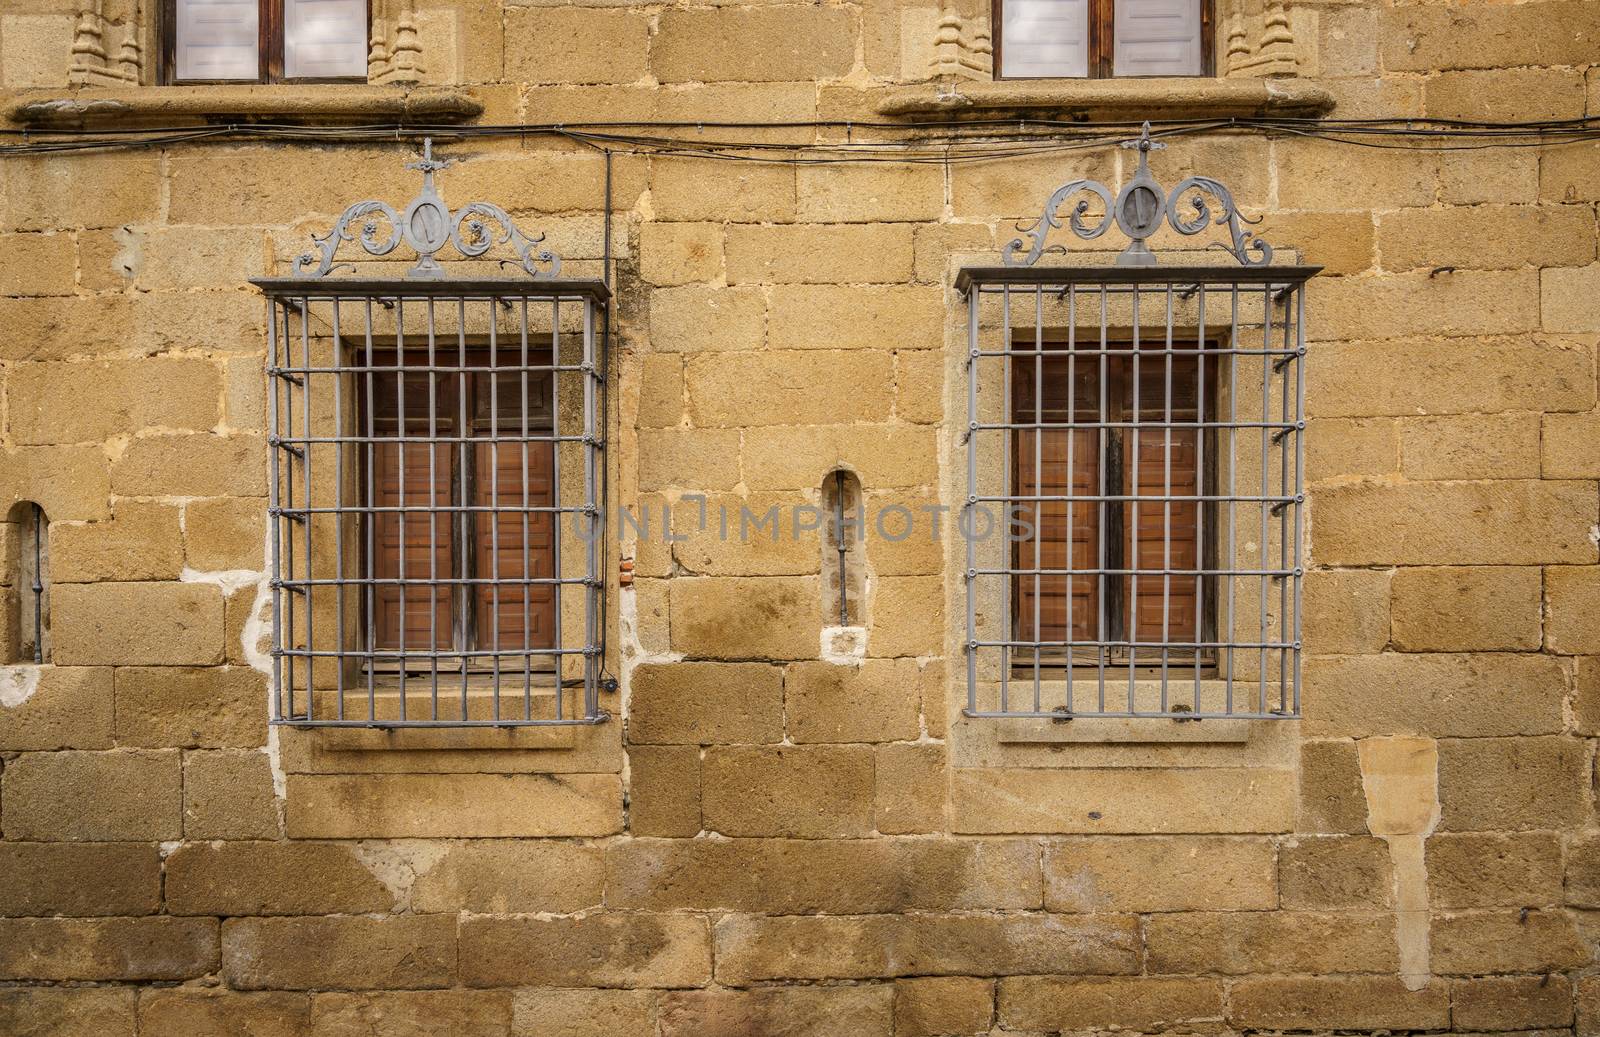 Window with bars on a stone facade in old medieval town of Plasencia, Spain by tanaonte